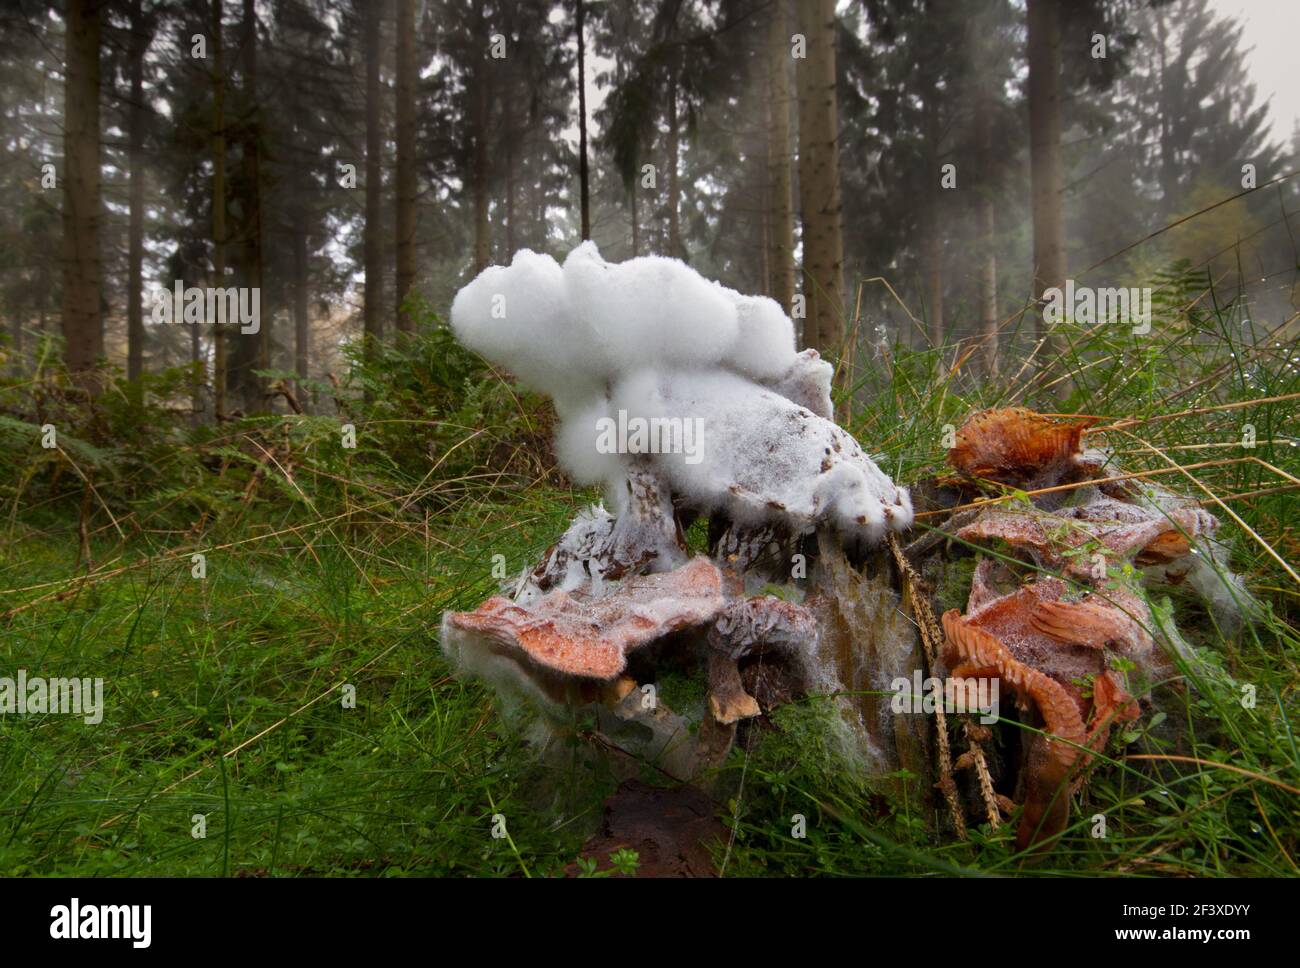 Moldy mushroom, a Freckled dapperling, growing on a rotting tree trunk in a forest Stock Photo